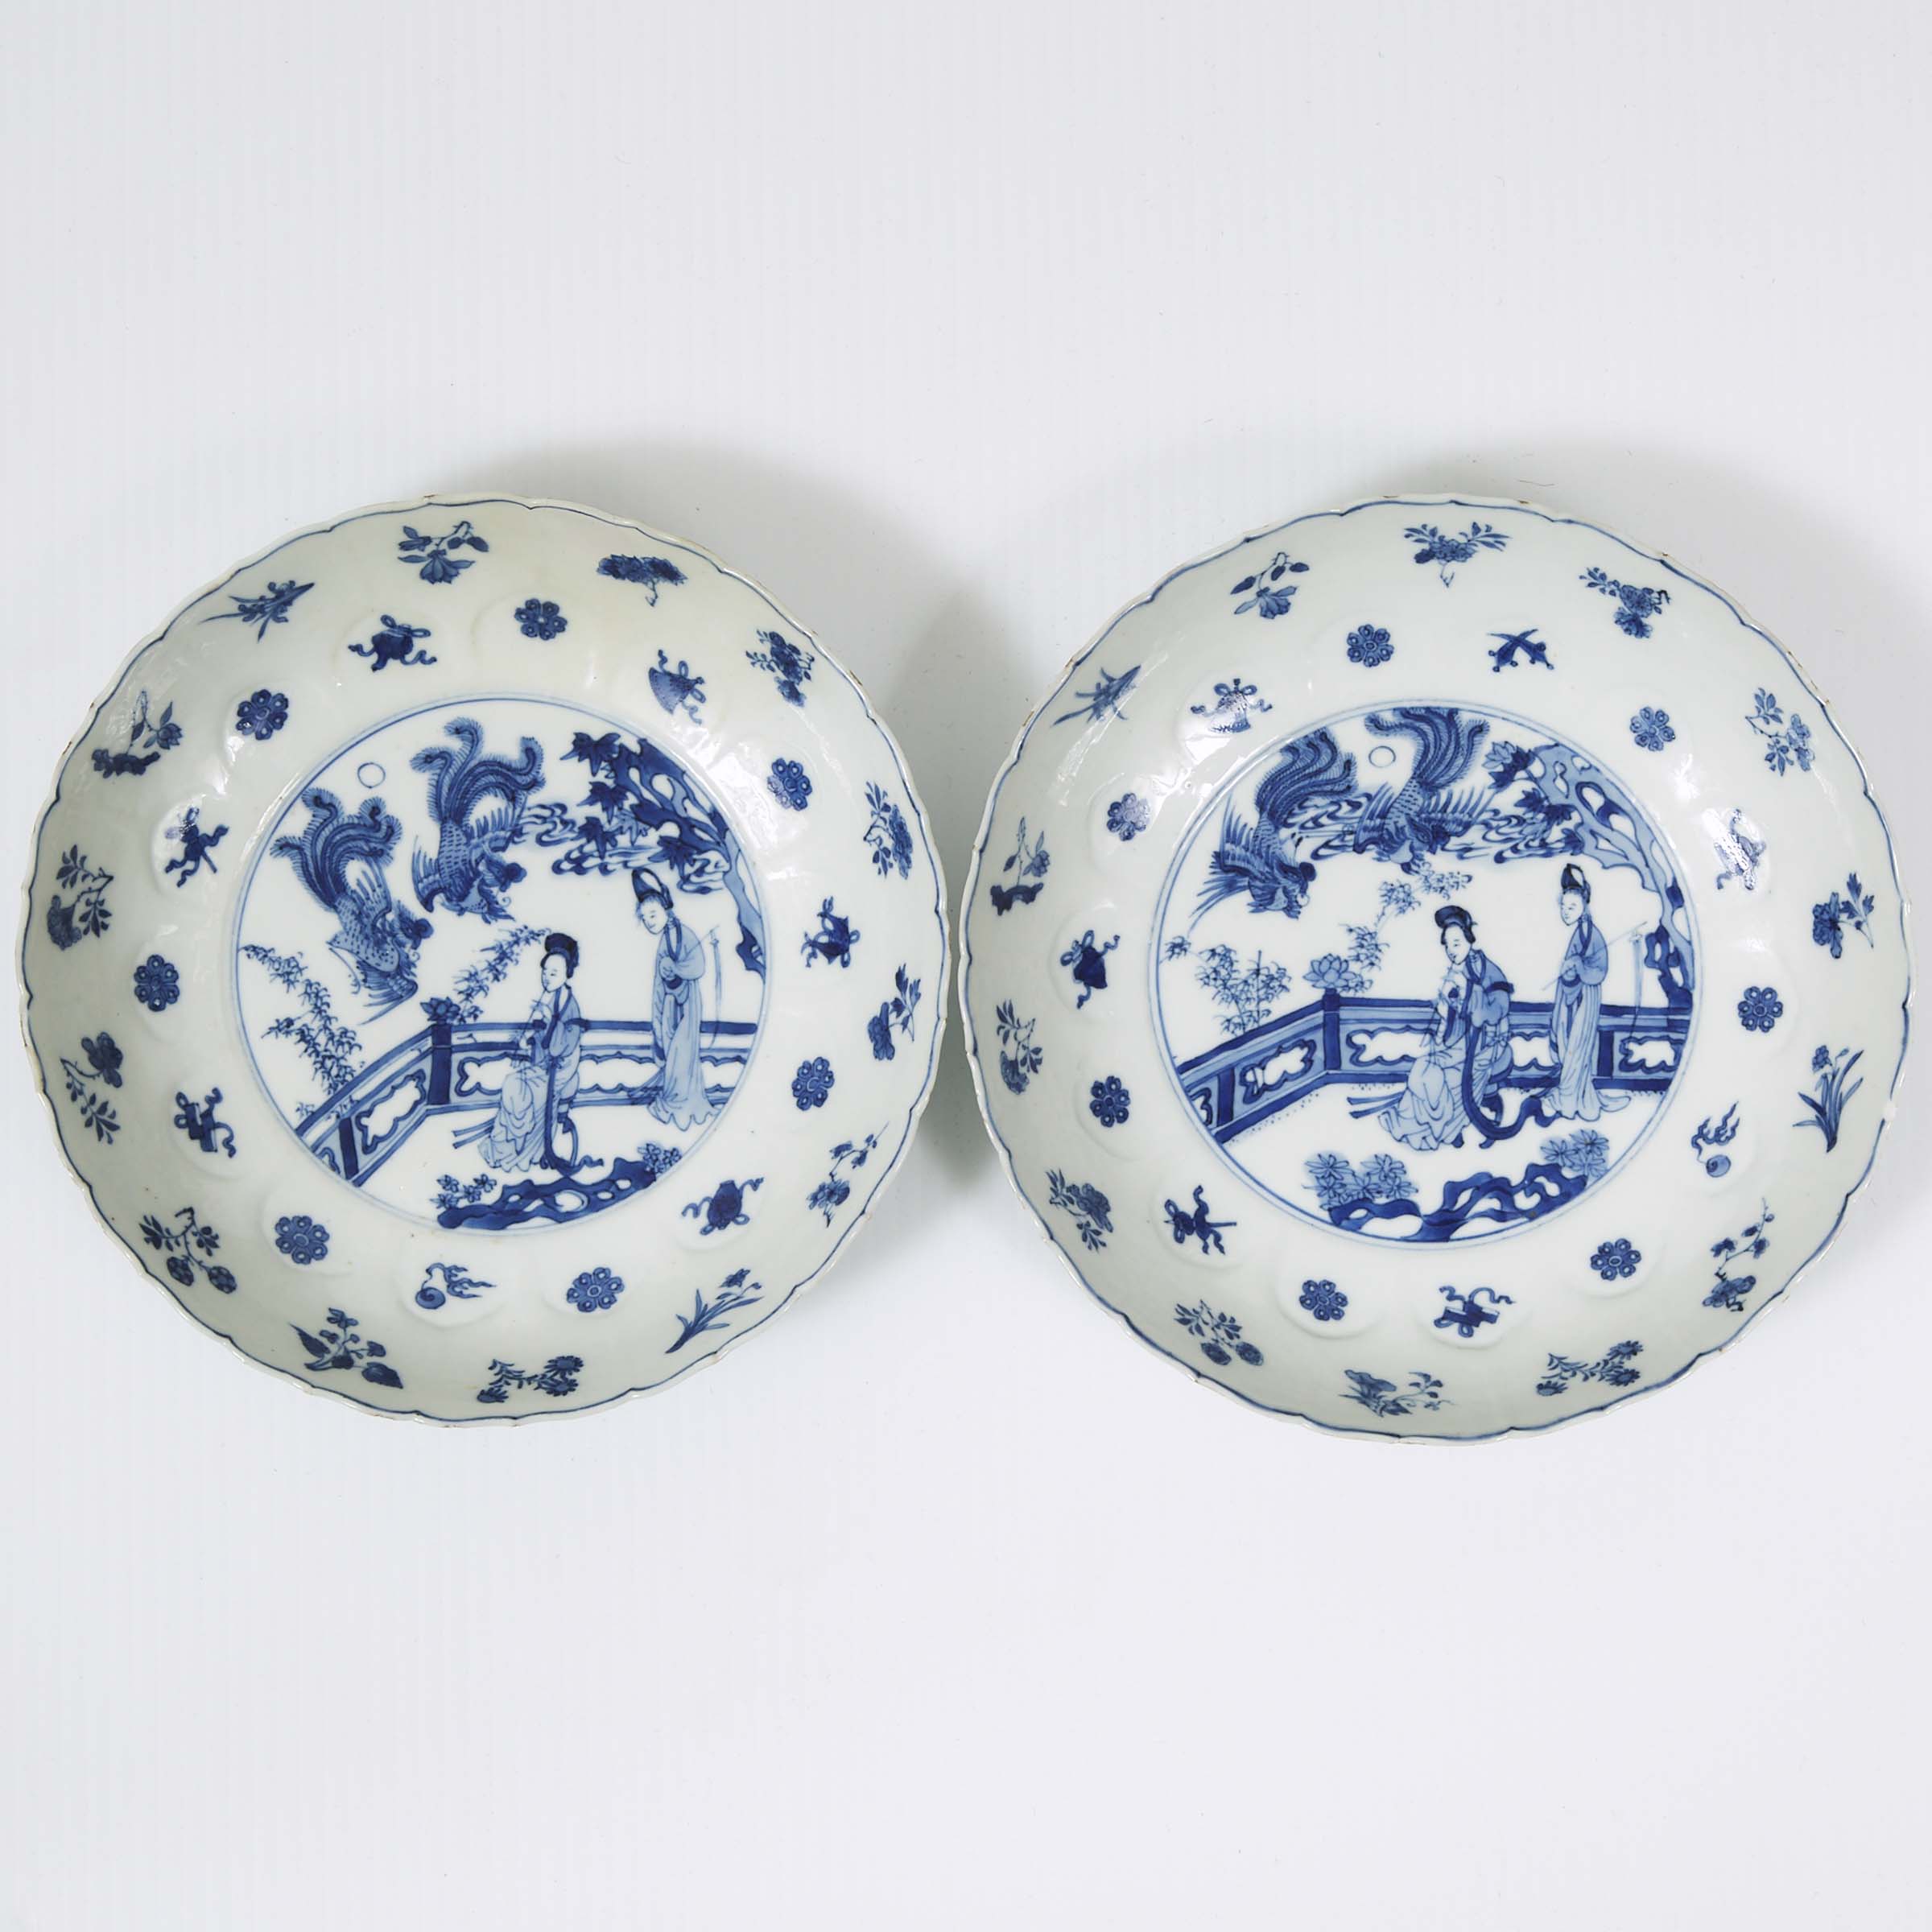 A Pair of Blue and White 'Ladies and Phoenix' Barbed Rim Dishes, Kangxi Period (1662-1722)